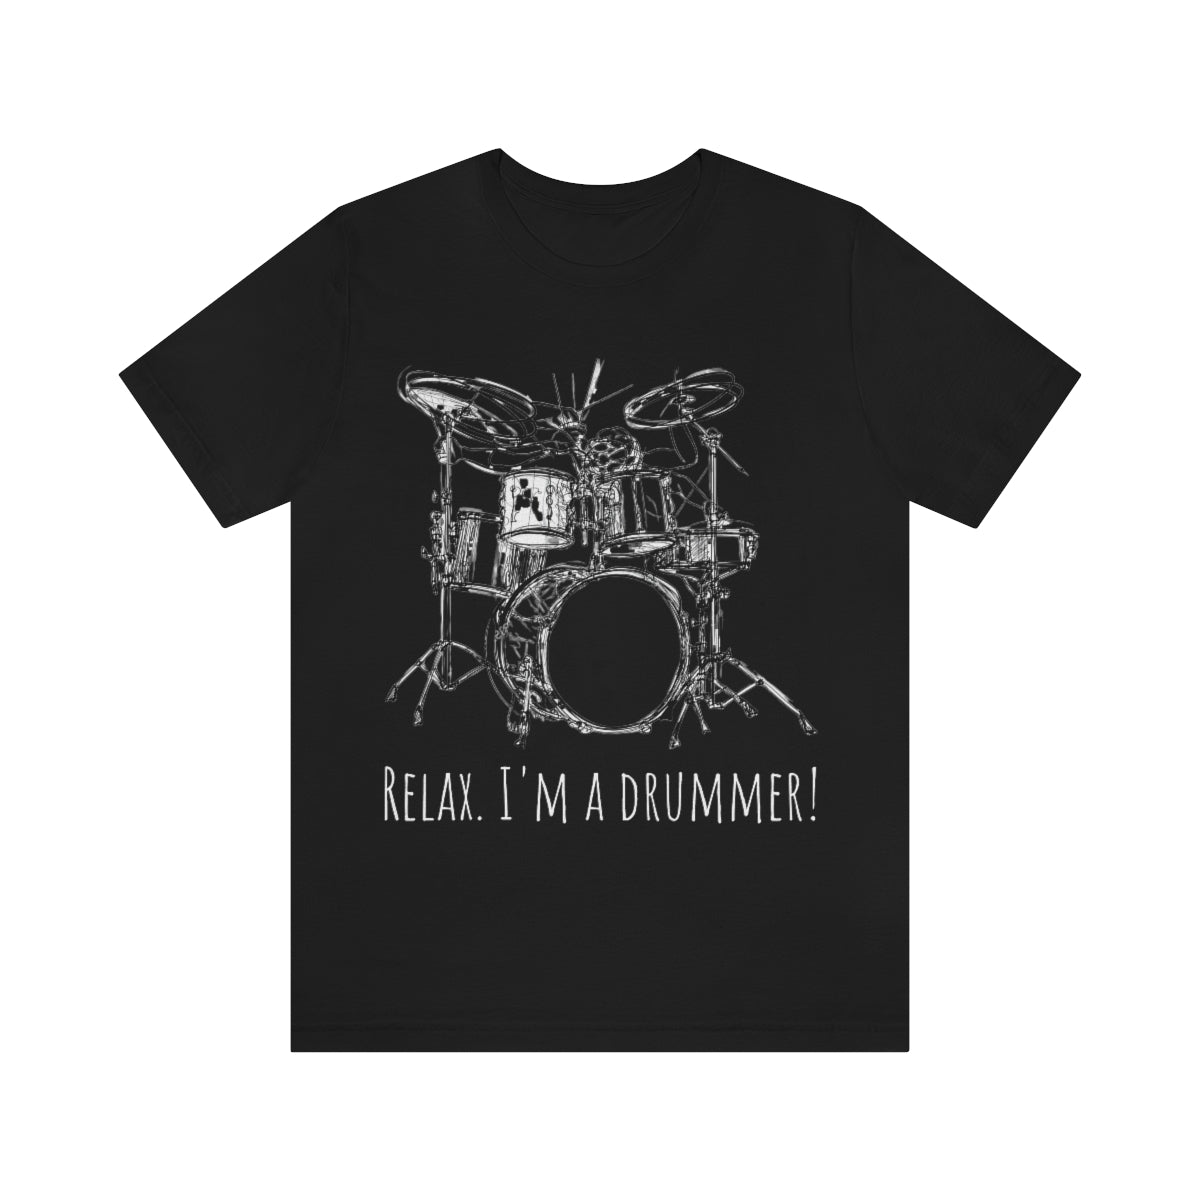 Very cool T-shirt "relax. I'm a drummer!" Sketch design makes for an interesting T-Shirt. 